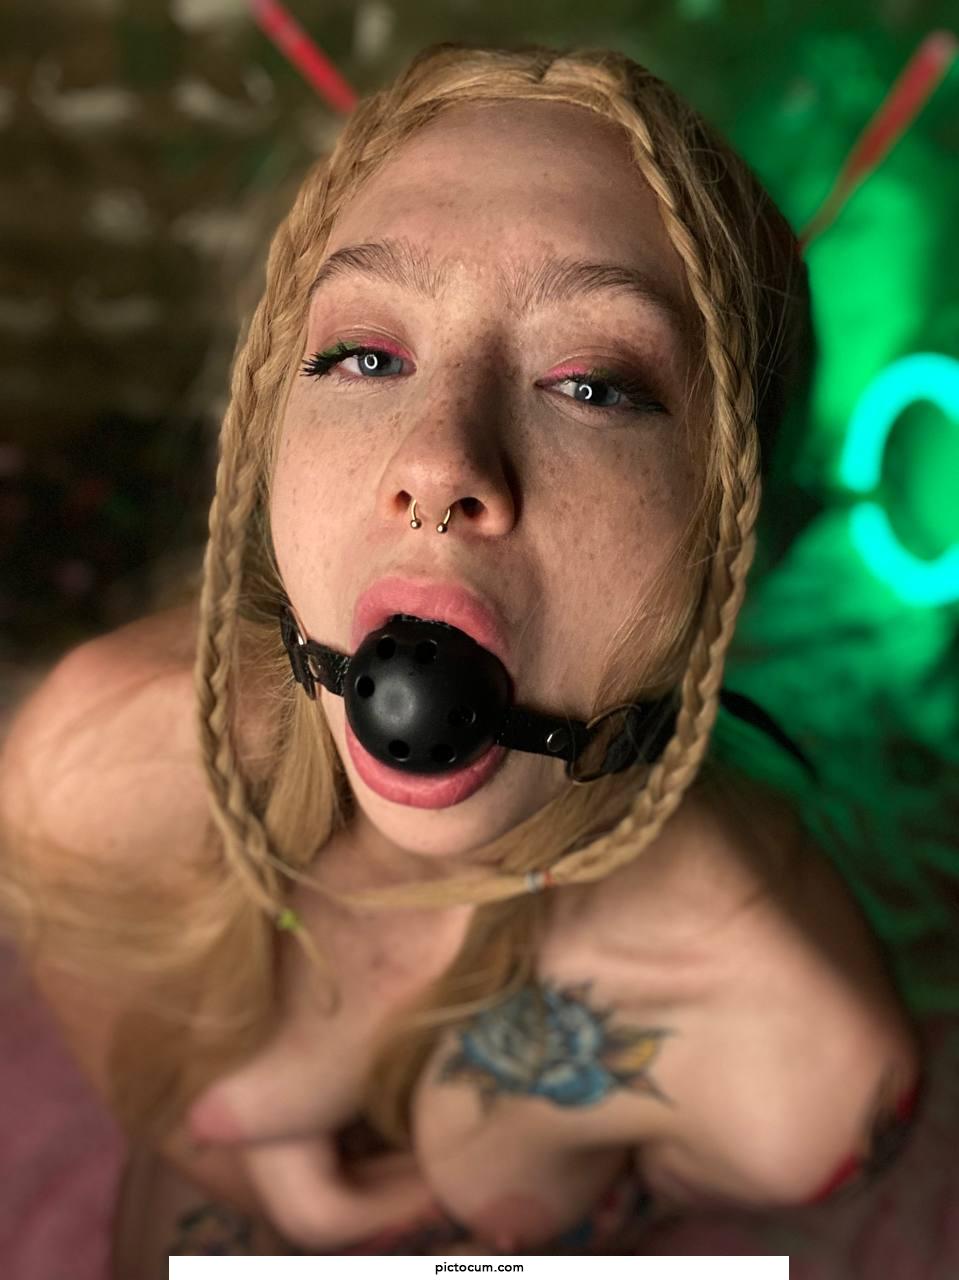 Hot girl really wants to fuck with a gag in her mouth tonight